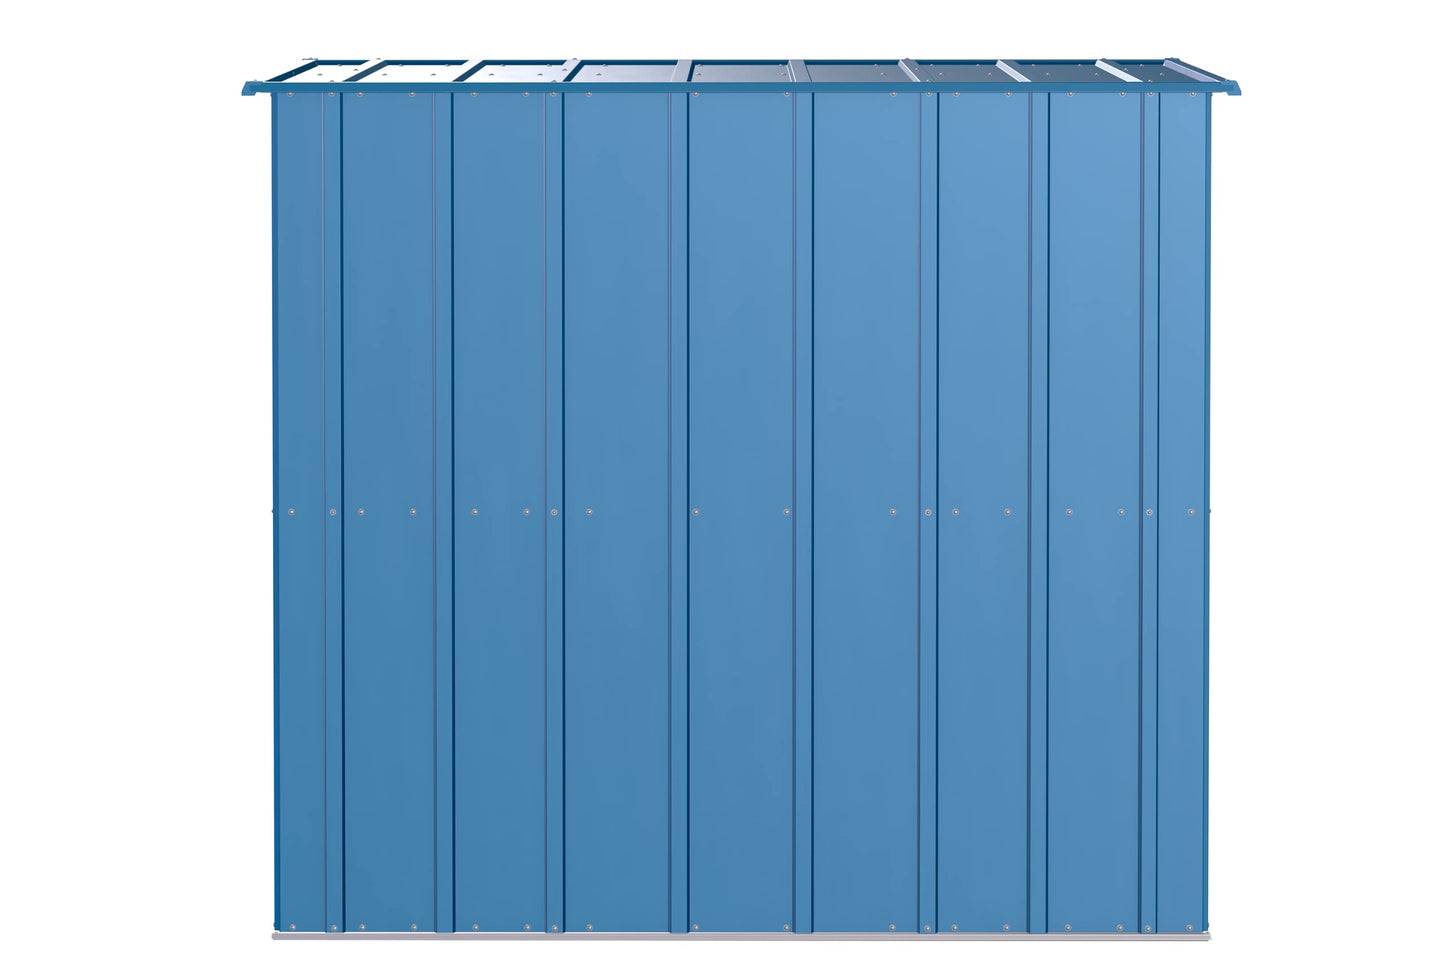 Arrow Shed Classic 6' x 4' Outdoor Padlockable Steel Storage Shed Building Blue Grey 6' x 4'